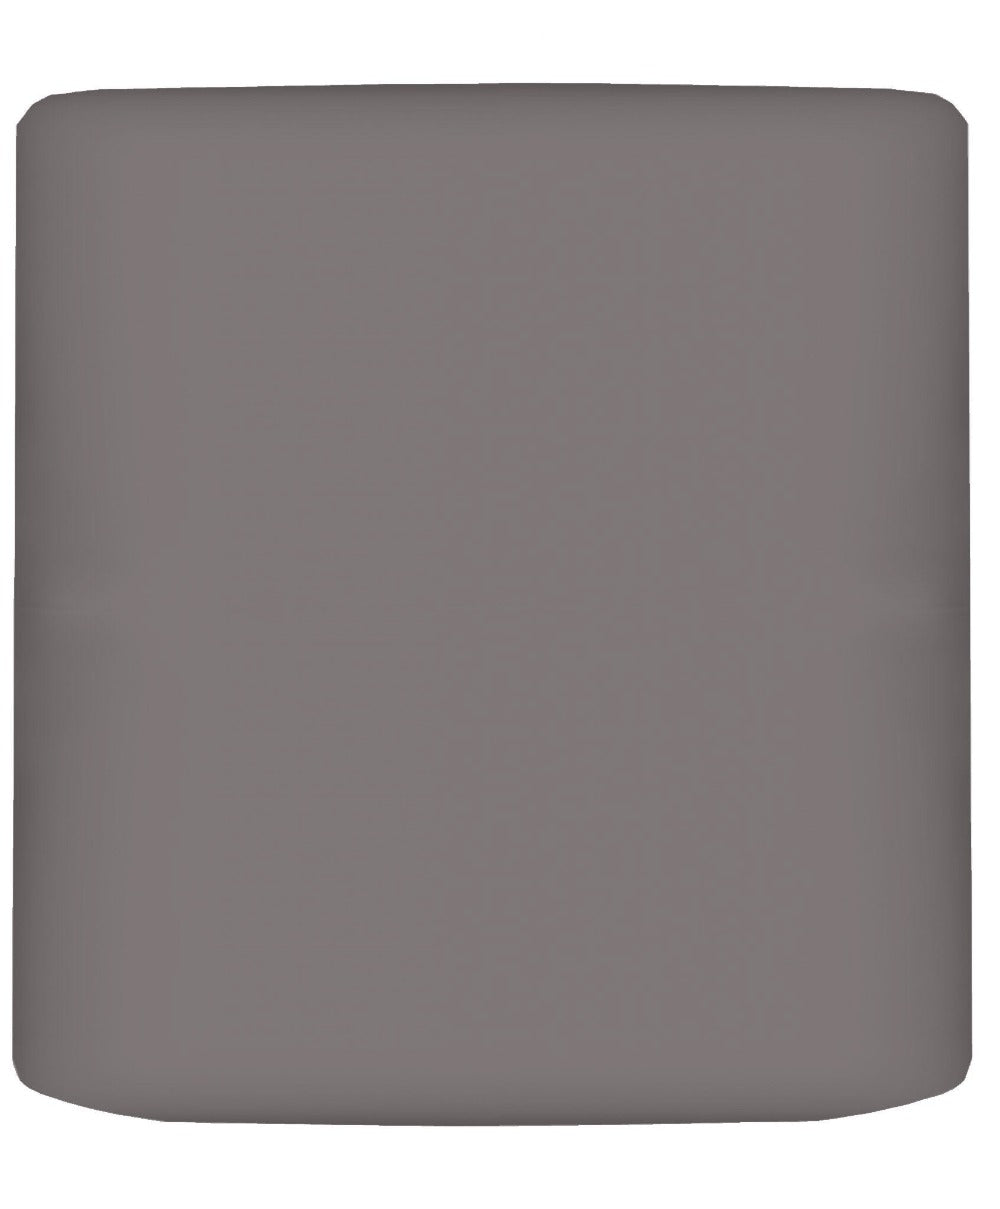 Fitted sheet - Solid Color - Pearl gray